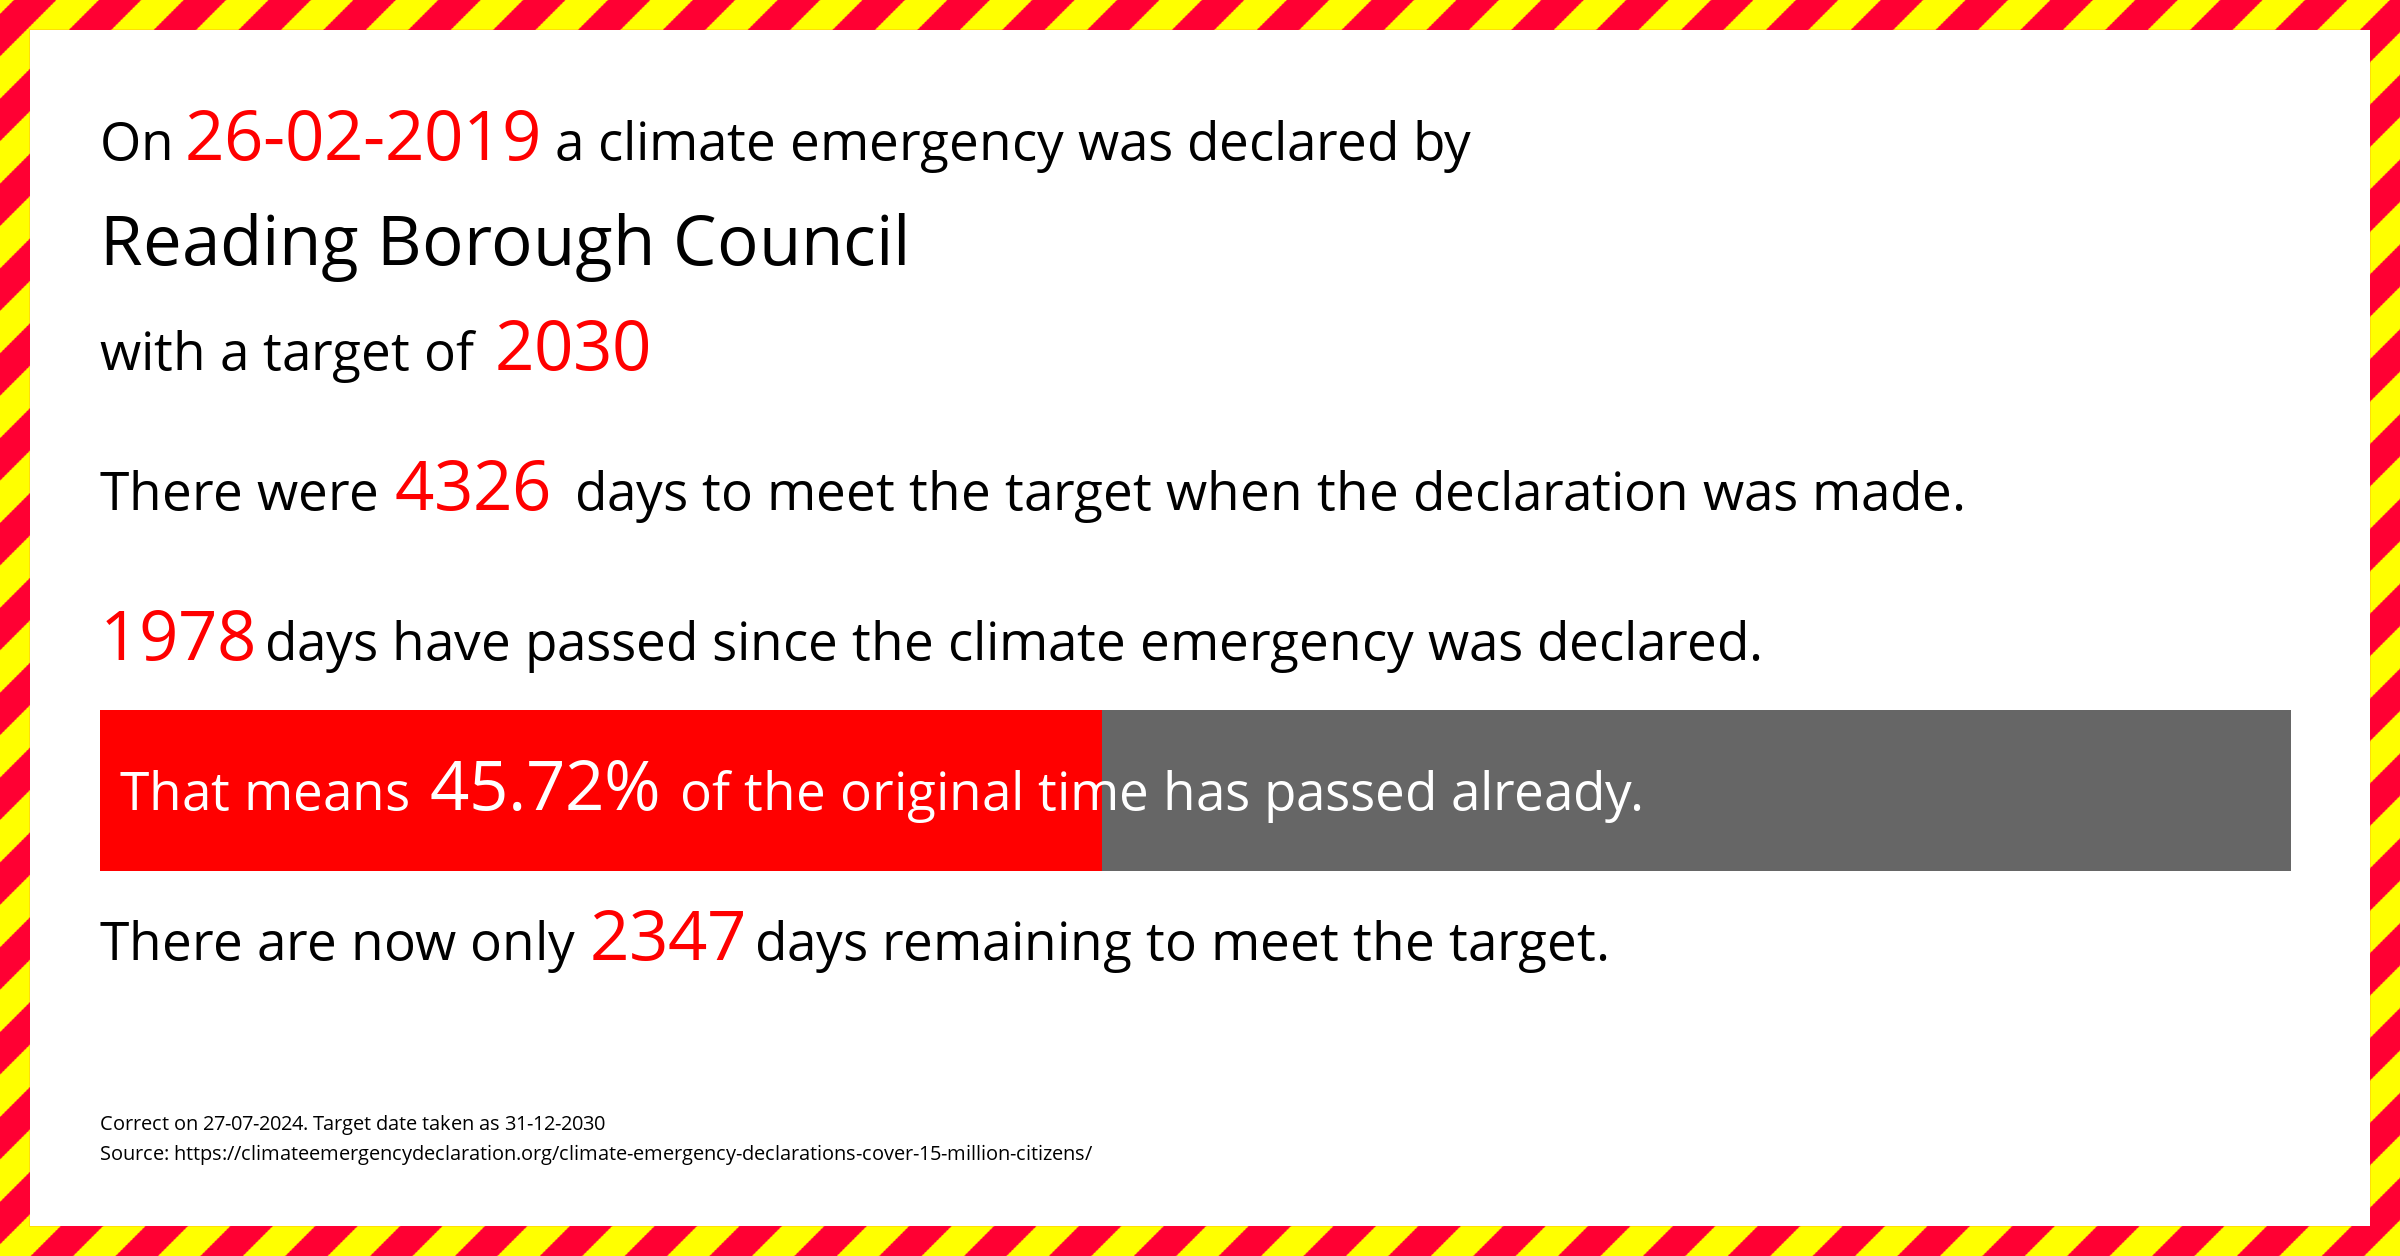 Reading Borough Council declared a Climate emergency on Tuesday 26th February 2019, with a target of 2030.